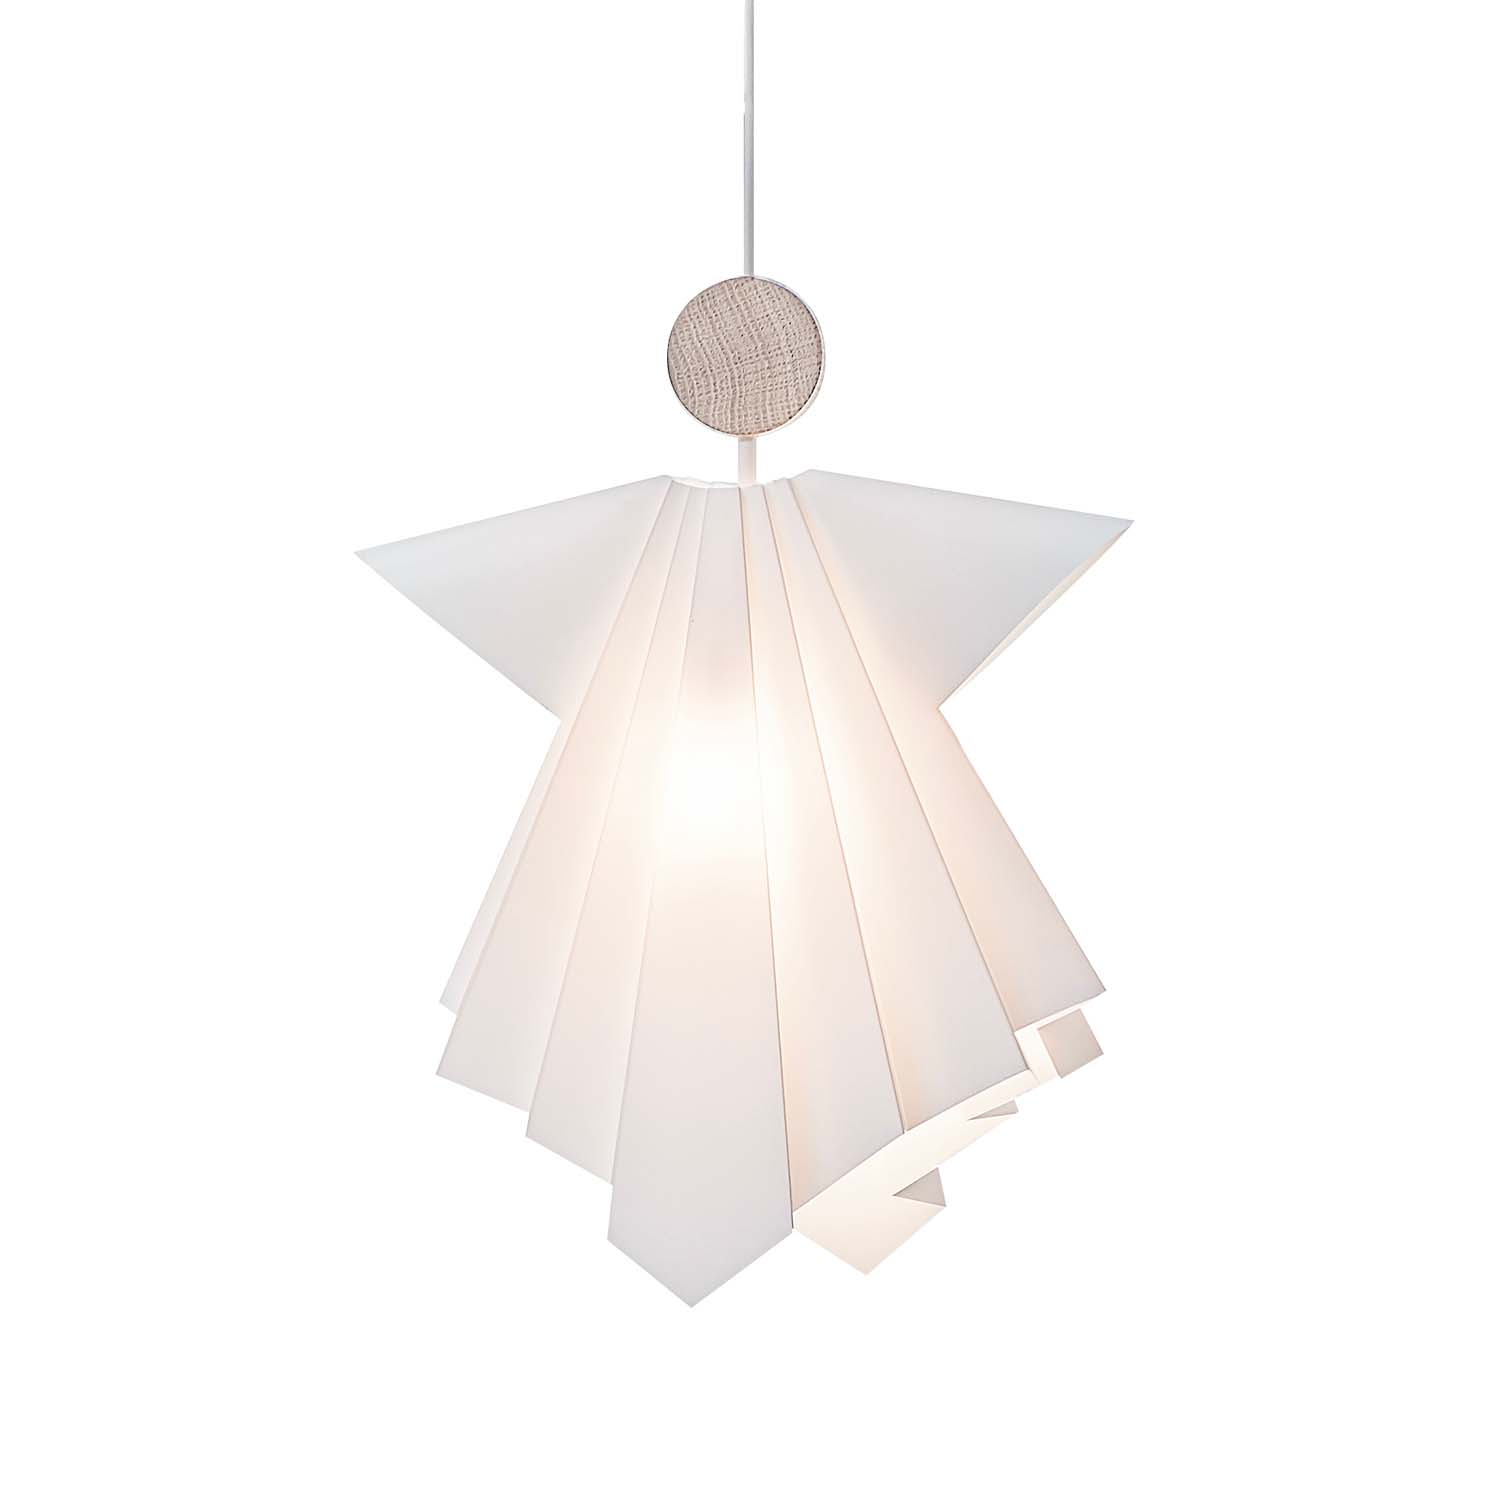 ANGELS URIEL - White acrylic pendant light in the shape of an angel